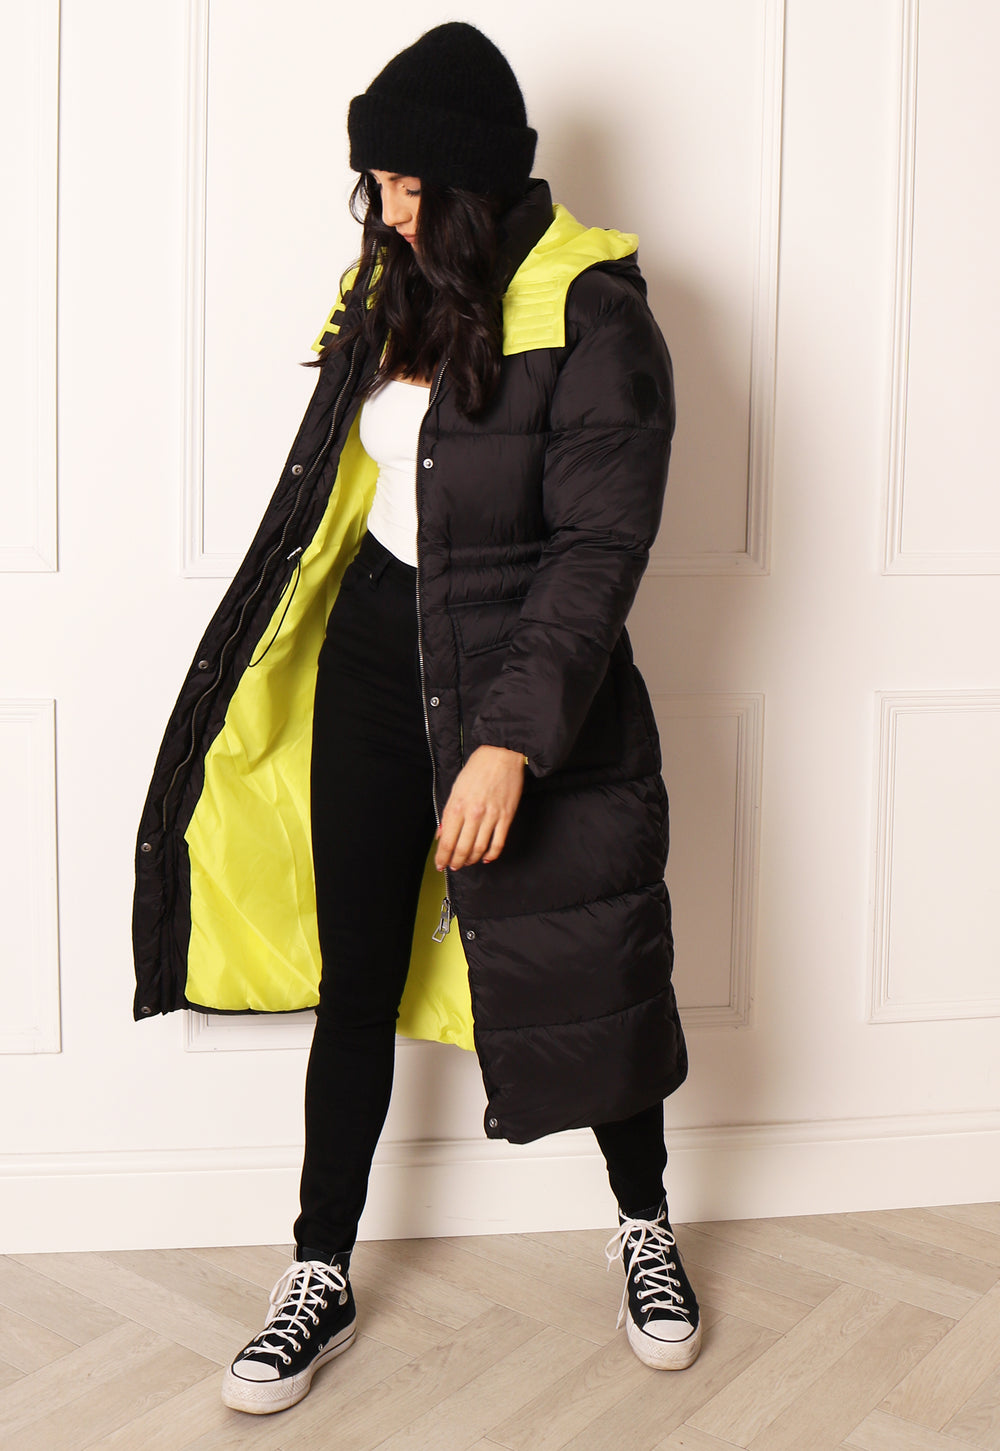 ONLY Puk Longline Midi Puffer Coat with Hood & Tie Waist in Black & Yellow - One Nation Clothing